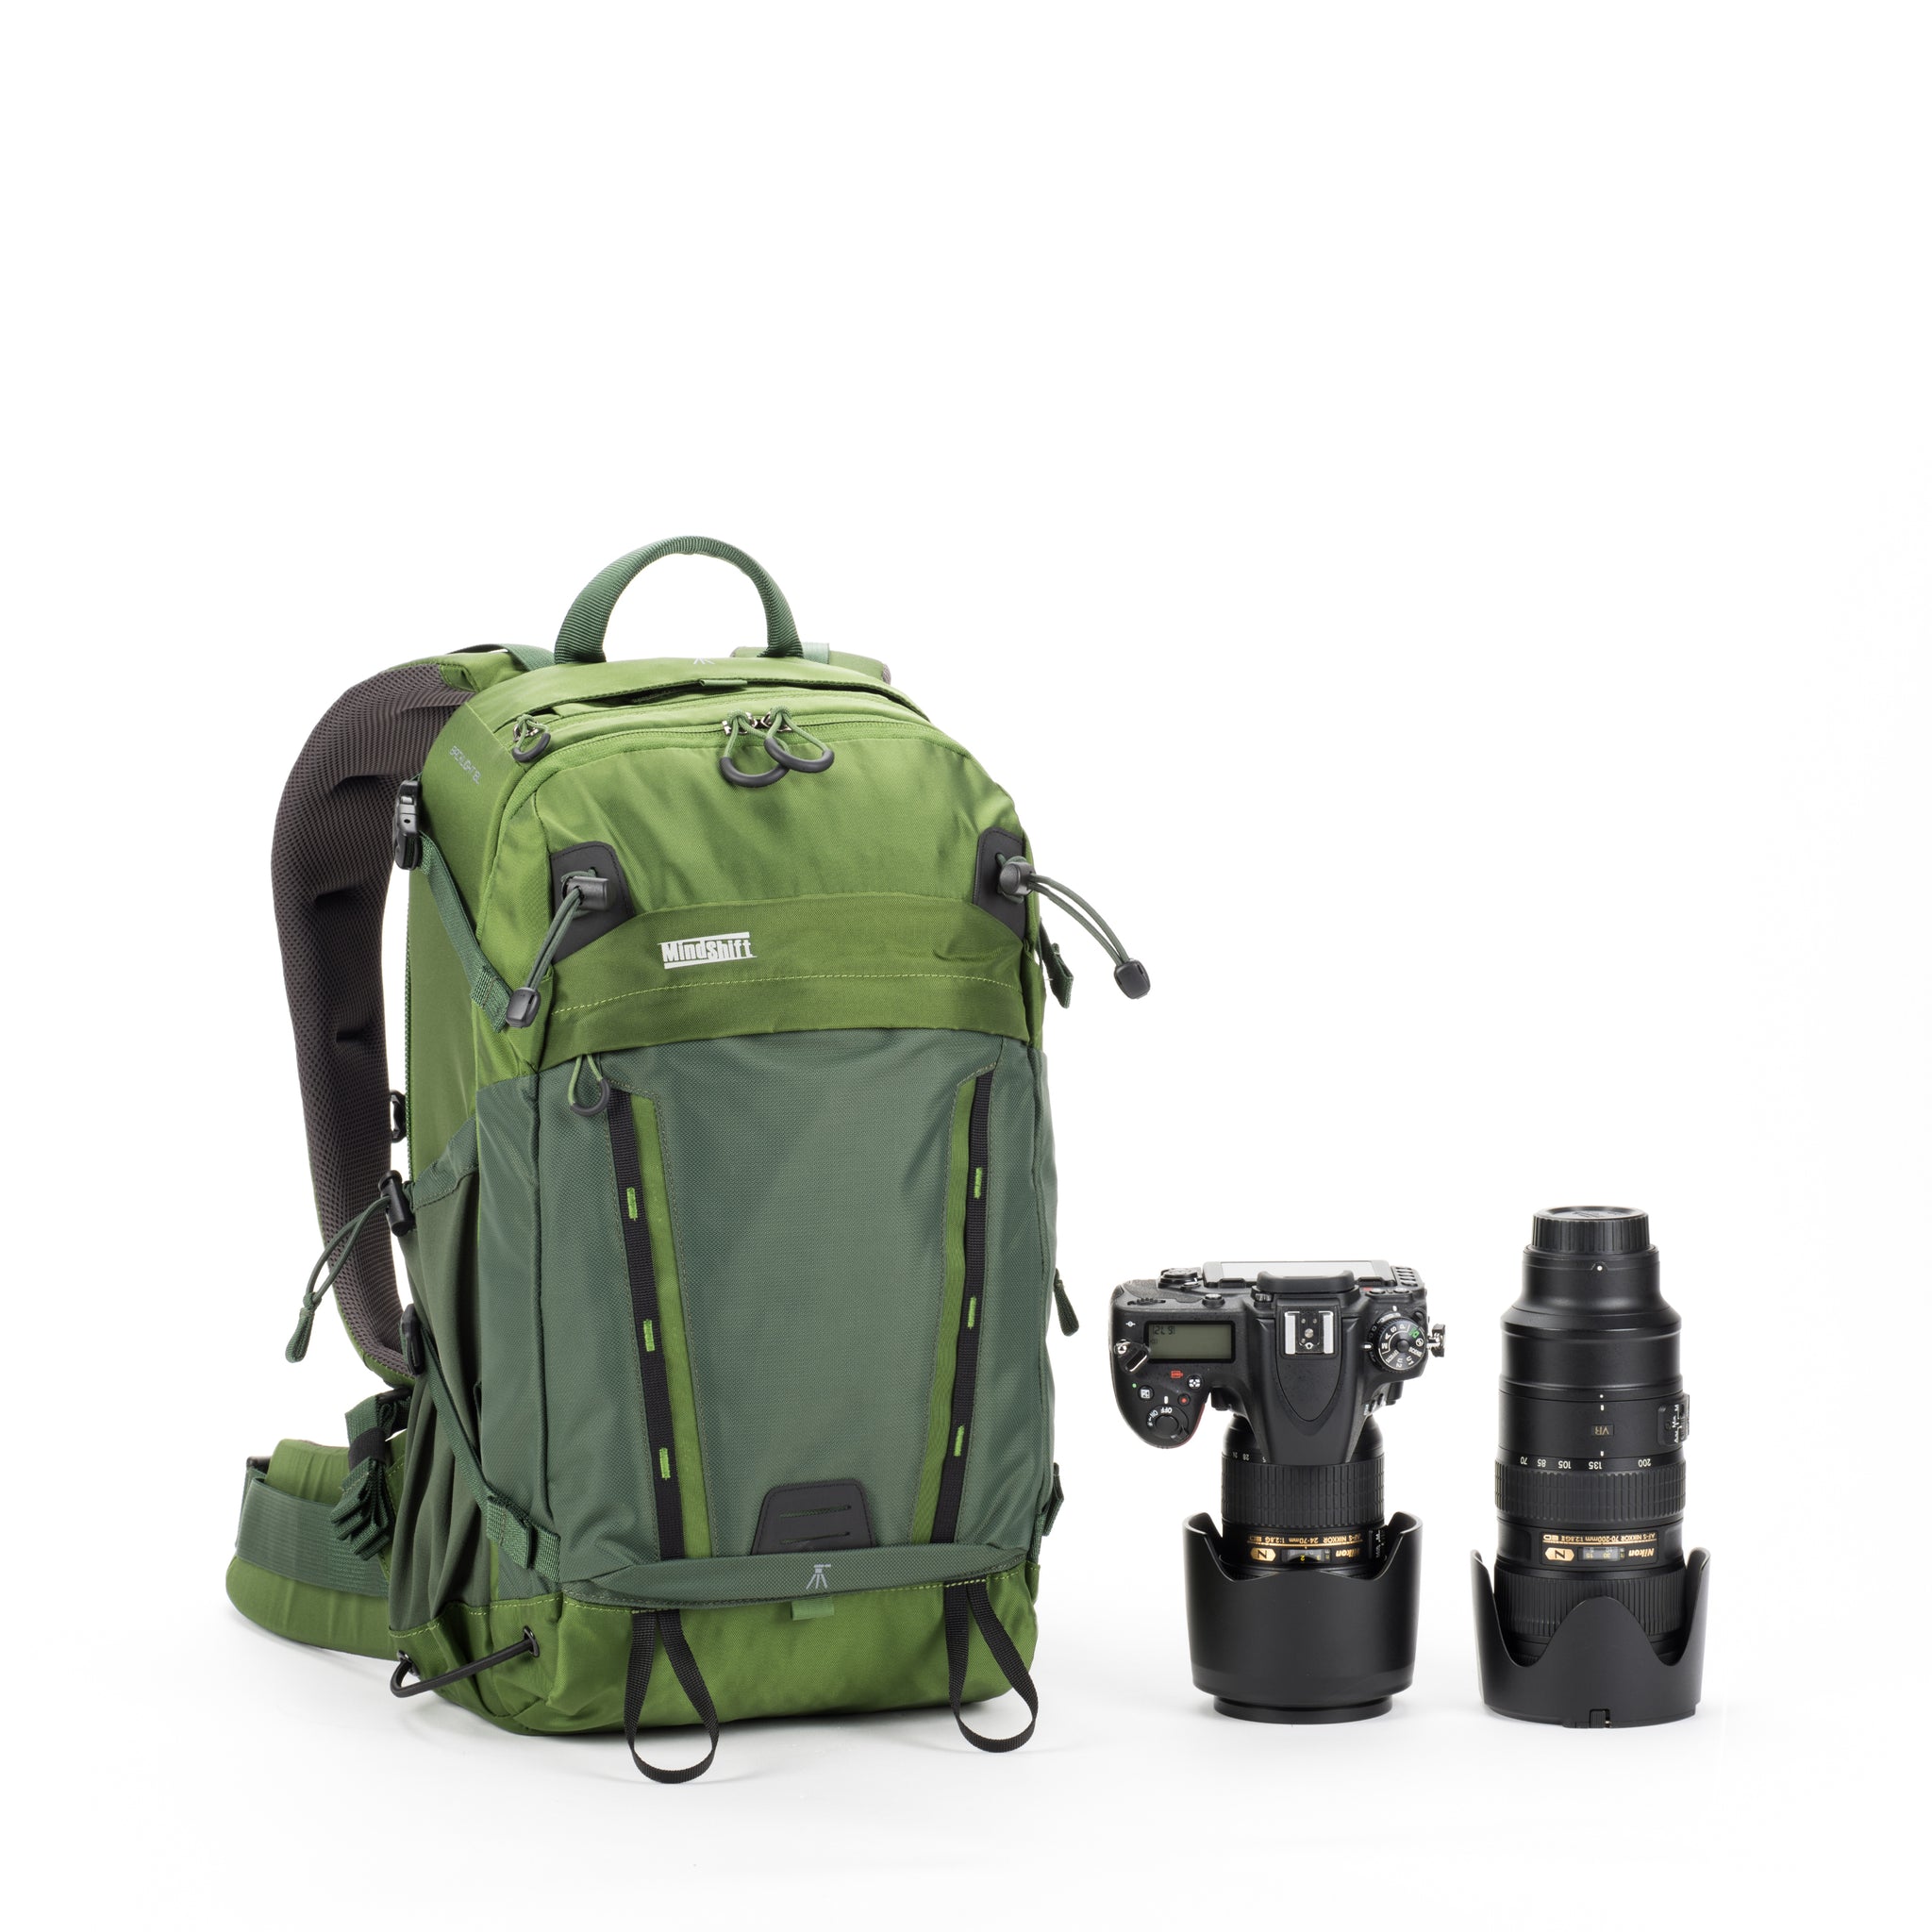 The BackLight® 18L, with a rear-panel compartment for photo gear, allows you to access your gear without taking off the backpack.